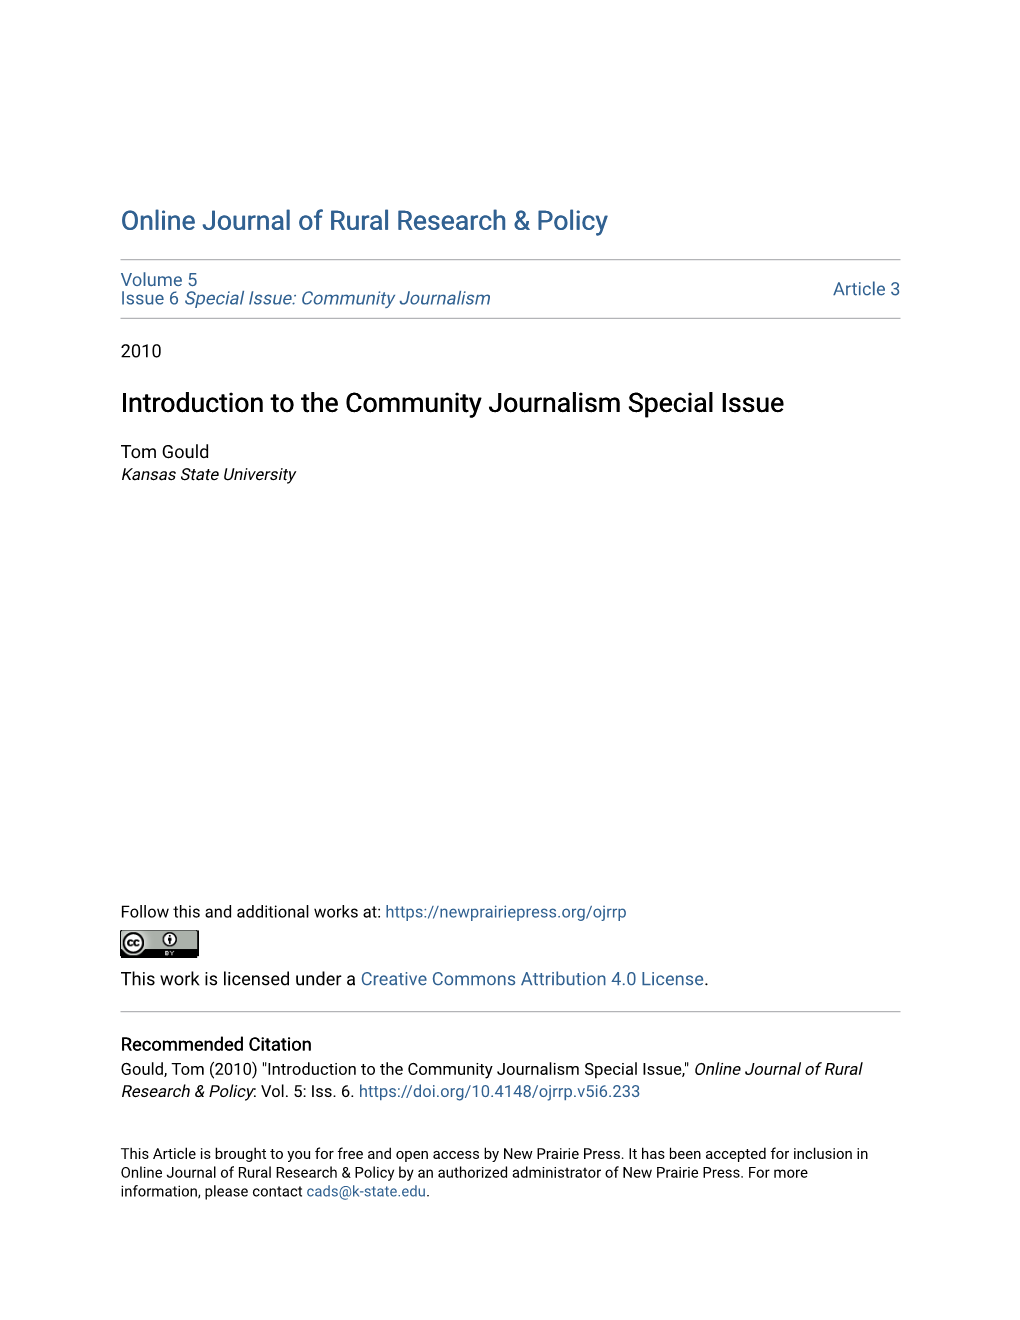 Introduction to the Community Journalism Special Issue